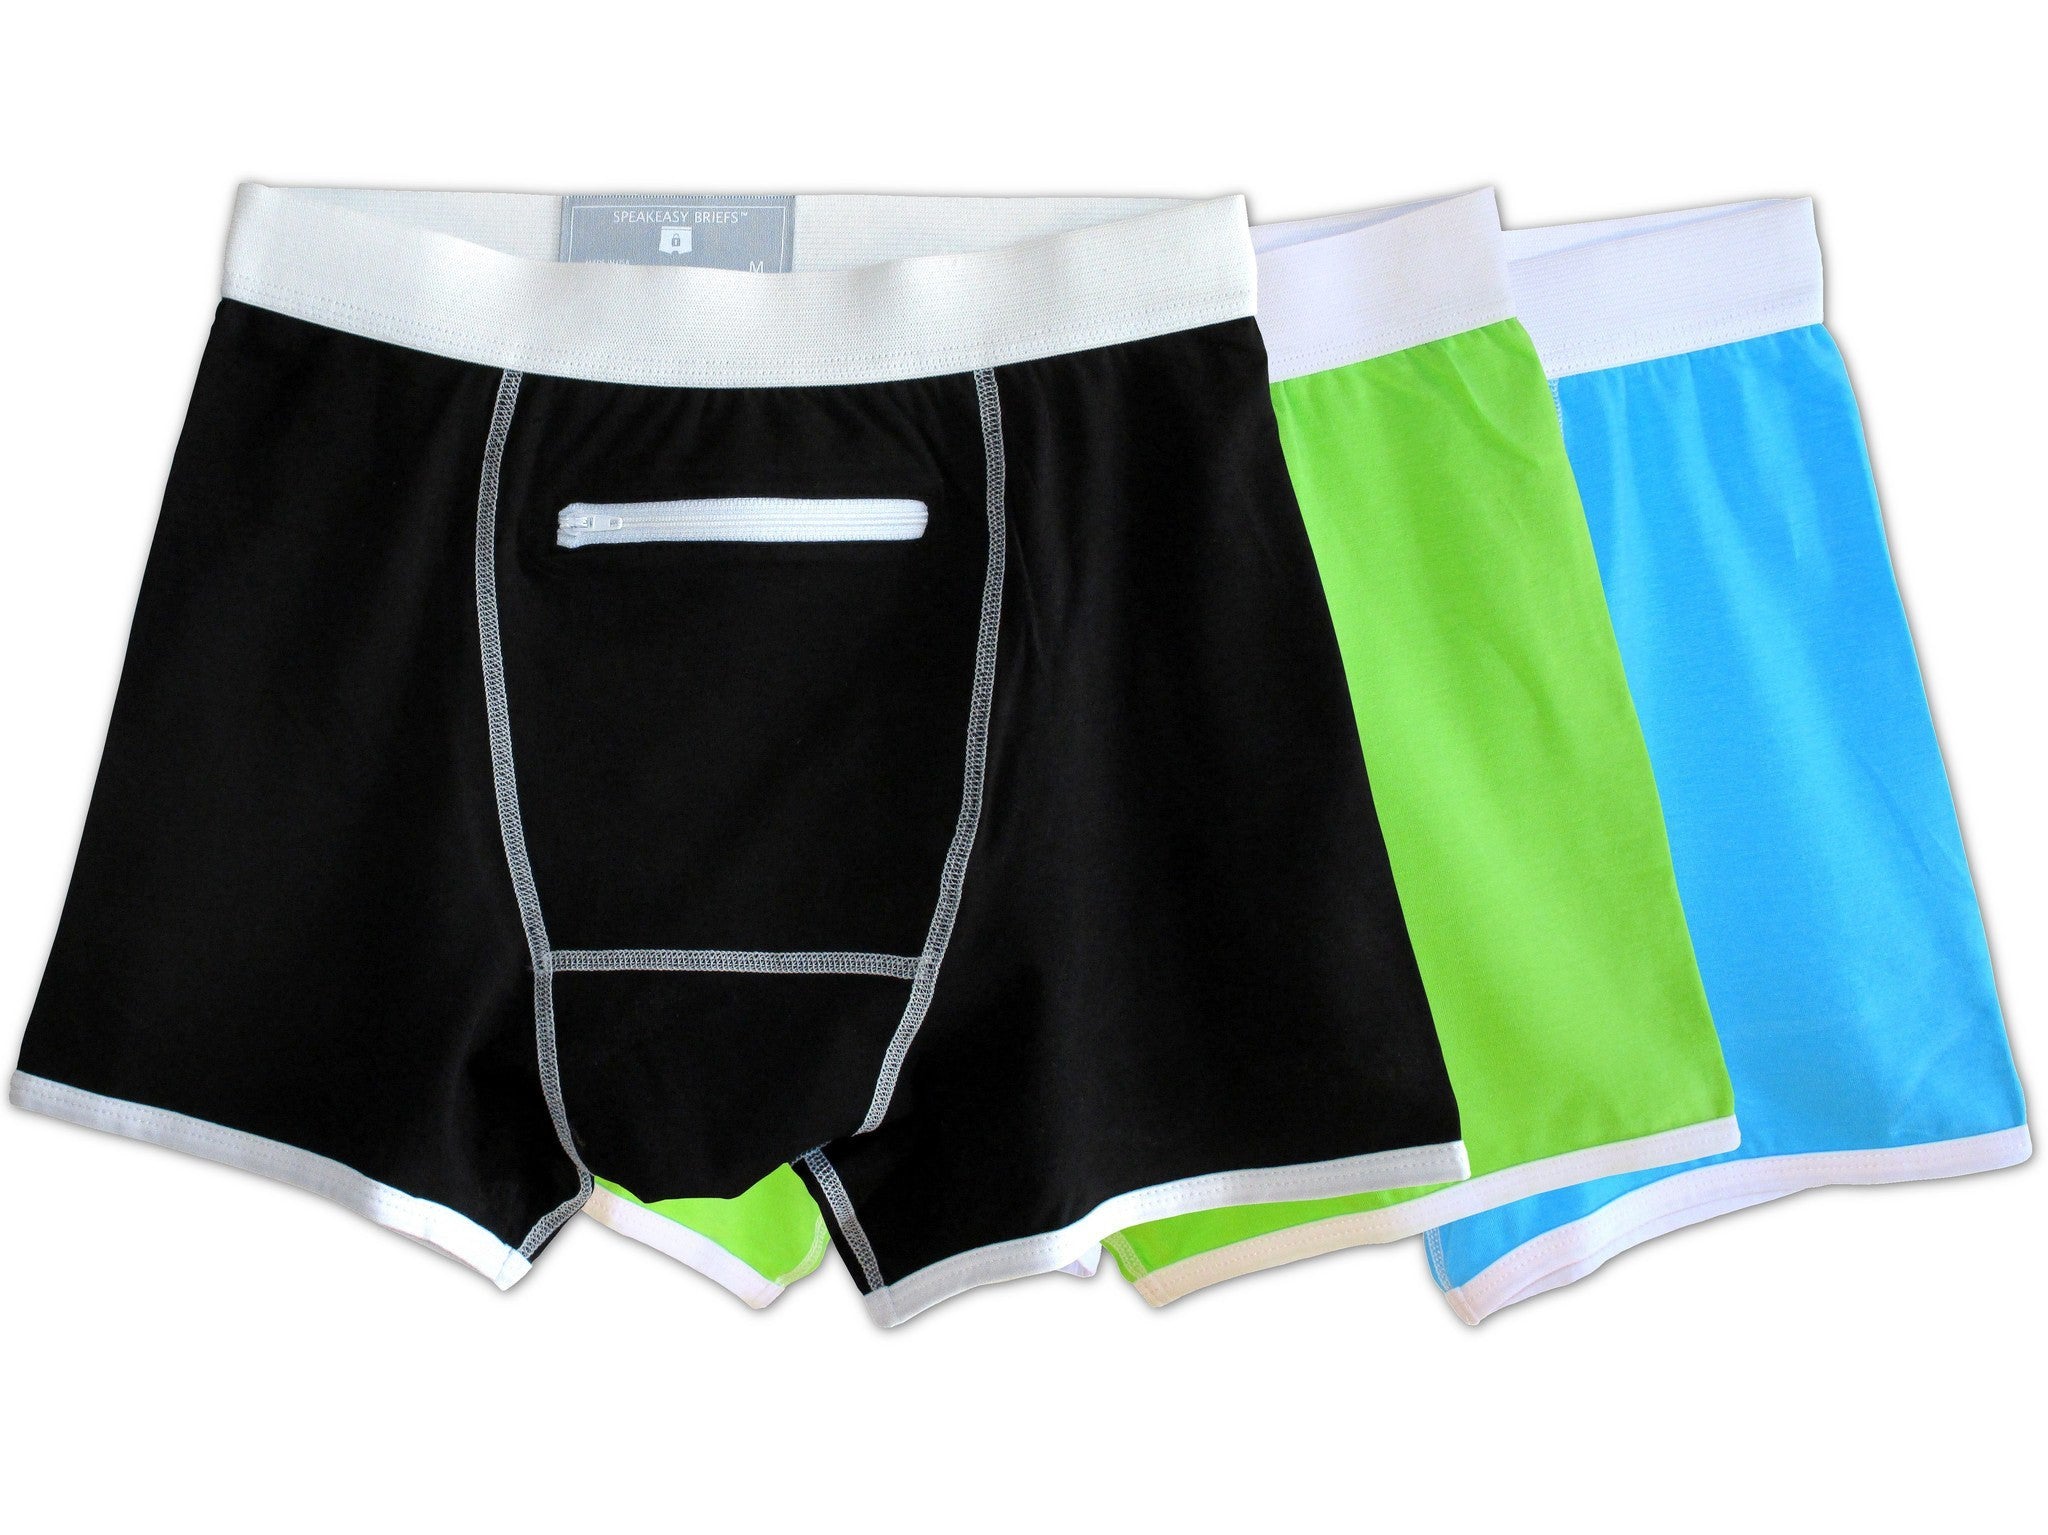 Keep It In Your Pants (Literally) With Speakeasy Briefs